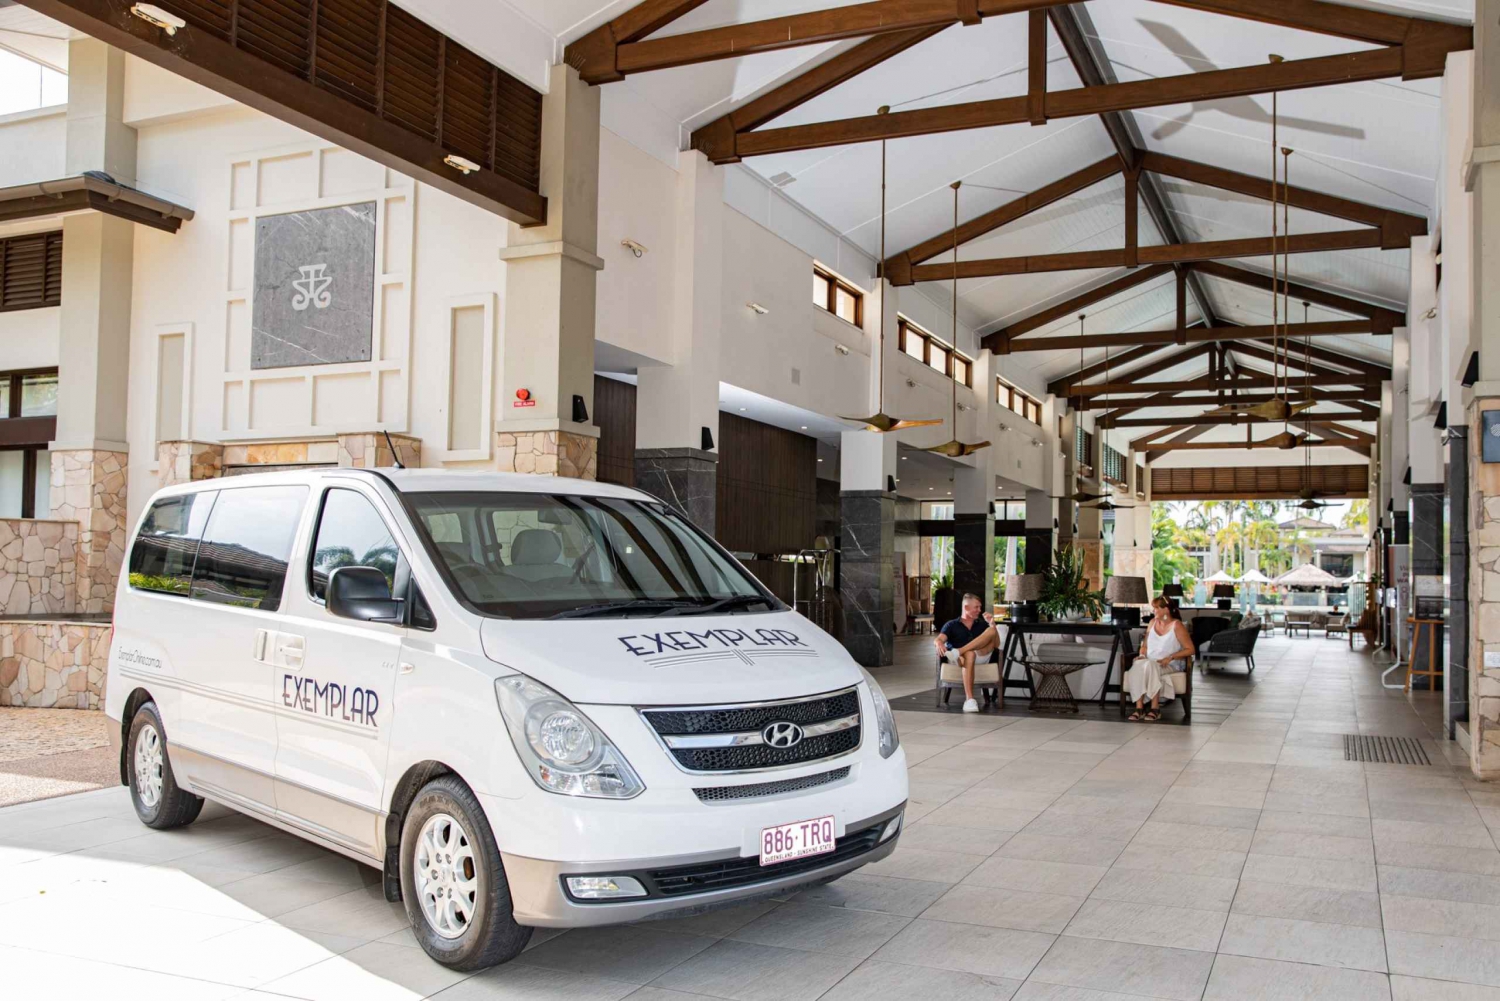 Cairns Airport: Private Transfer to/from CBD, Nthn. Beaches